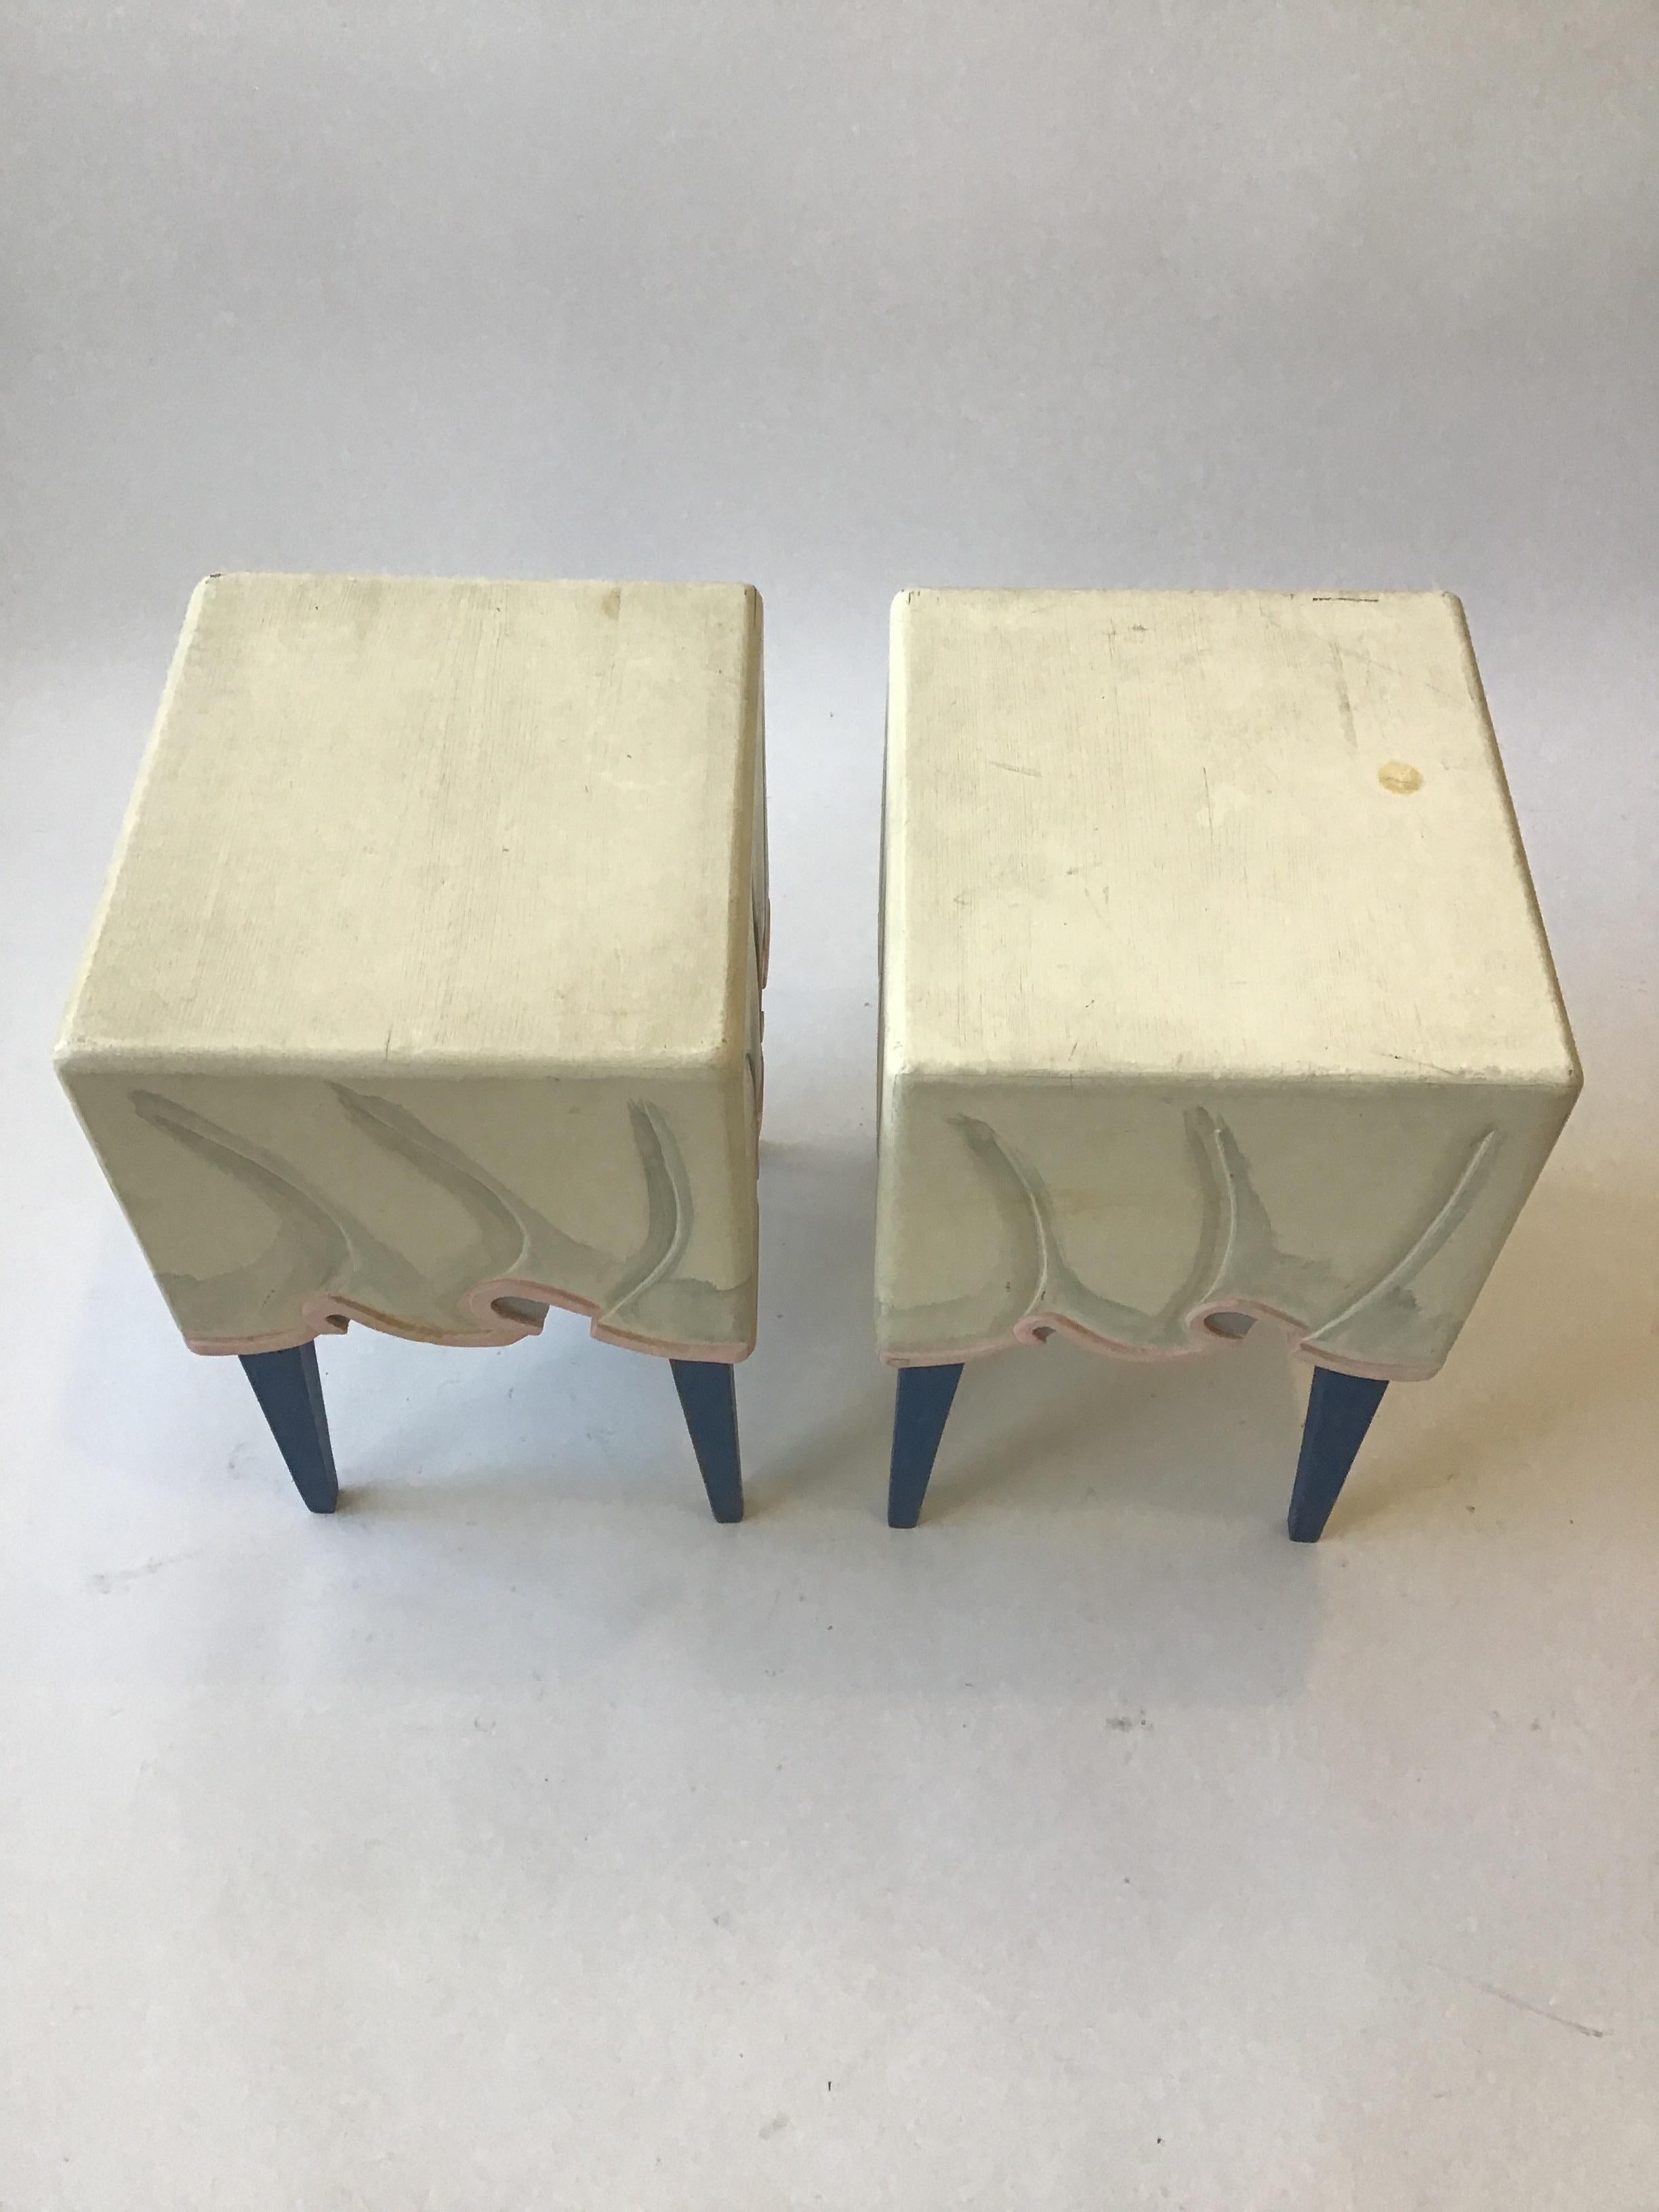 Pair of Hollywood Regency style, hand carved wood, painted side tables, to appear to be draped in fabric.